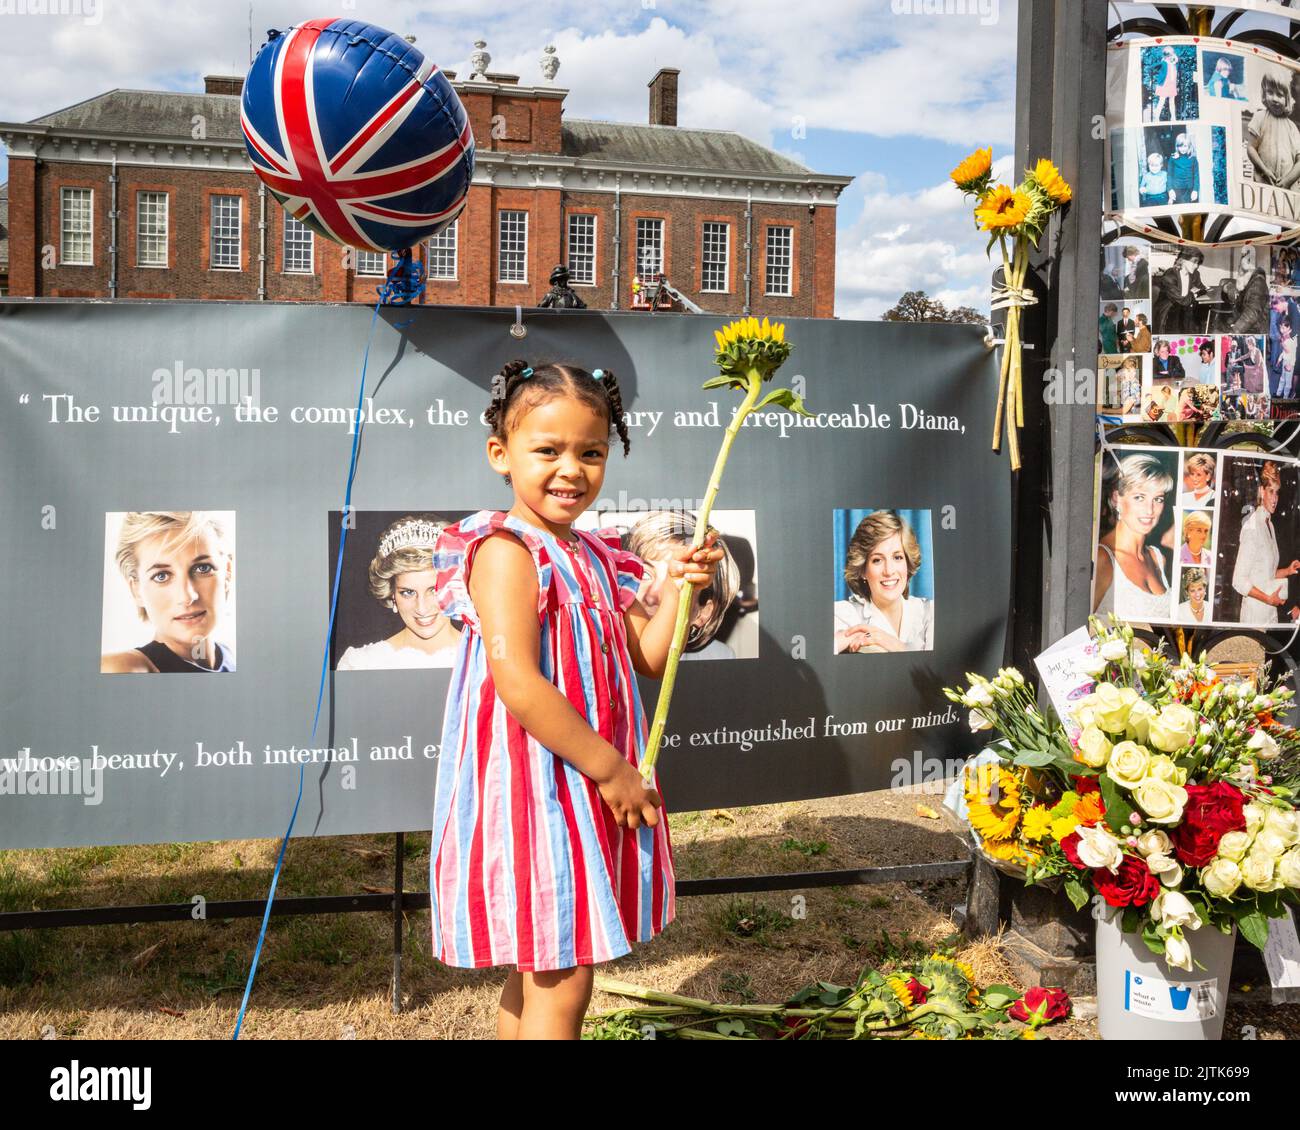 London, UK. 31st Aug, 2022. Amira, 3yrs old, is here with her family to remember Diana. Royal fans and visitors gather at the gates to Kensington Palace to commemorate the 25th anniversary of th tragic death of Diana Princess of Wales. Credit: Imageplotter/Alamy Live News Stock Photo